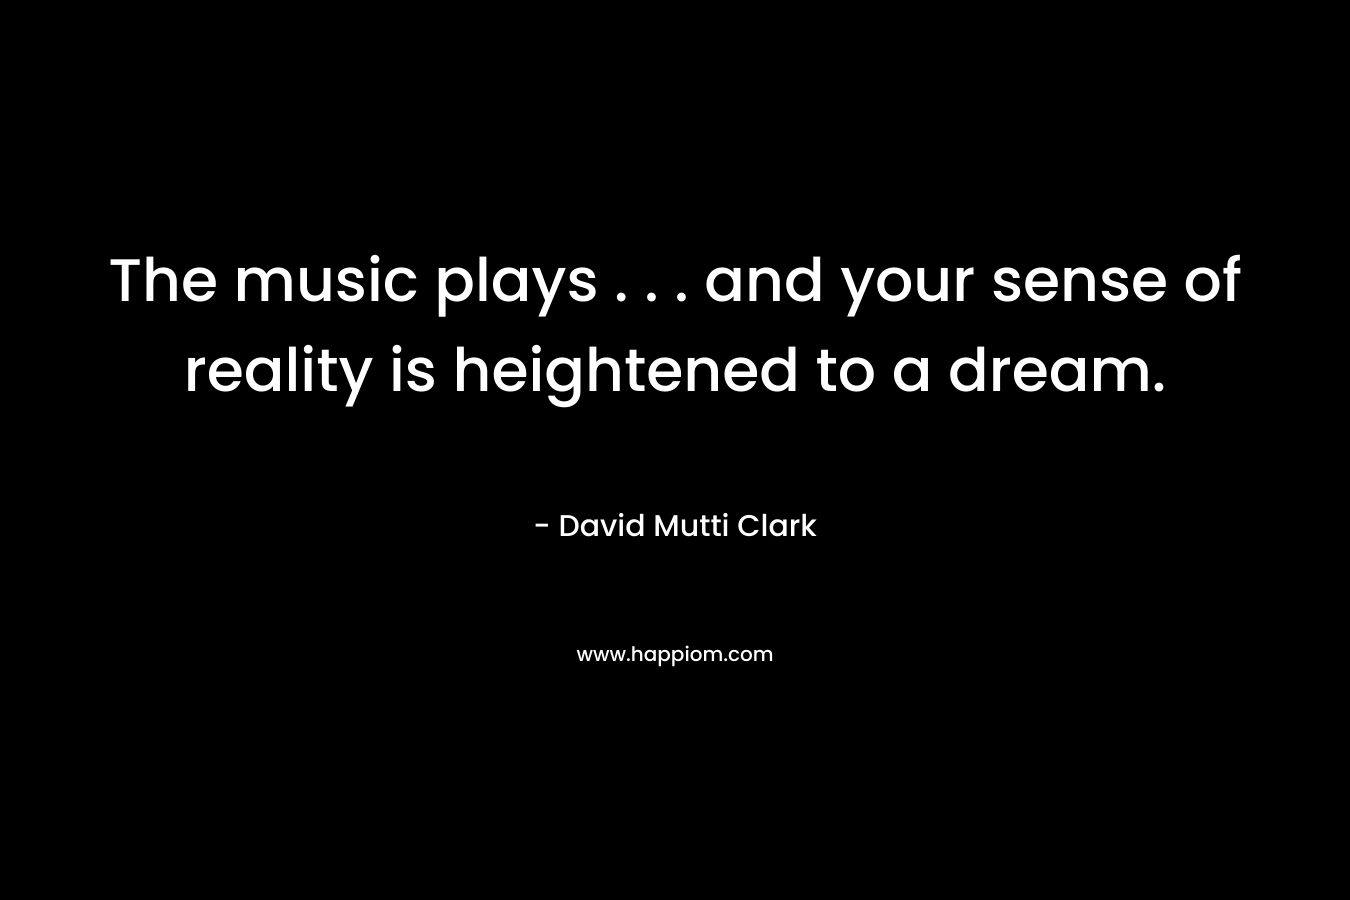 The music plays . . . and your sense of reality is heightened to a dream.